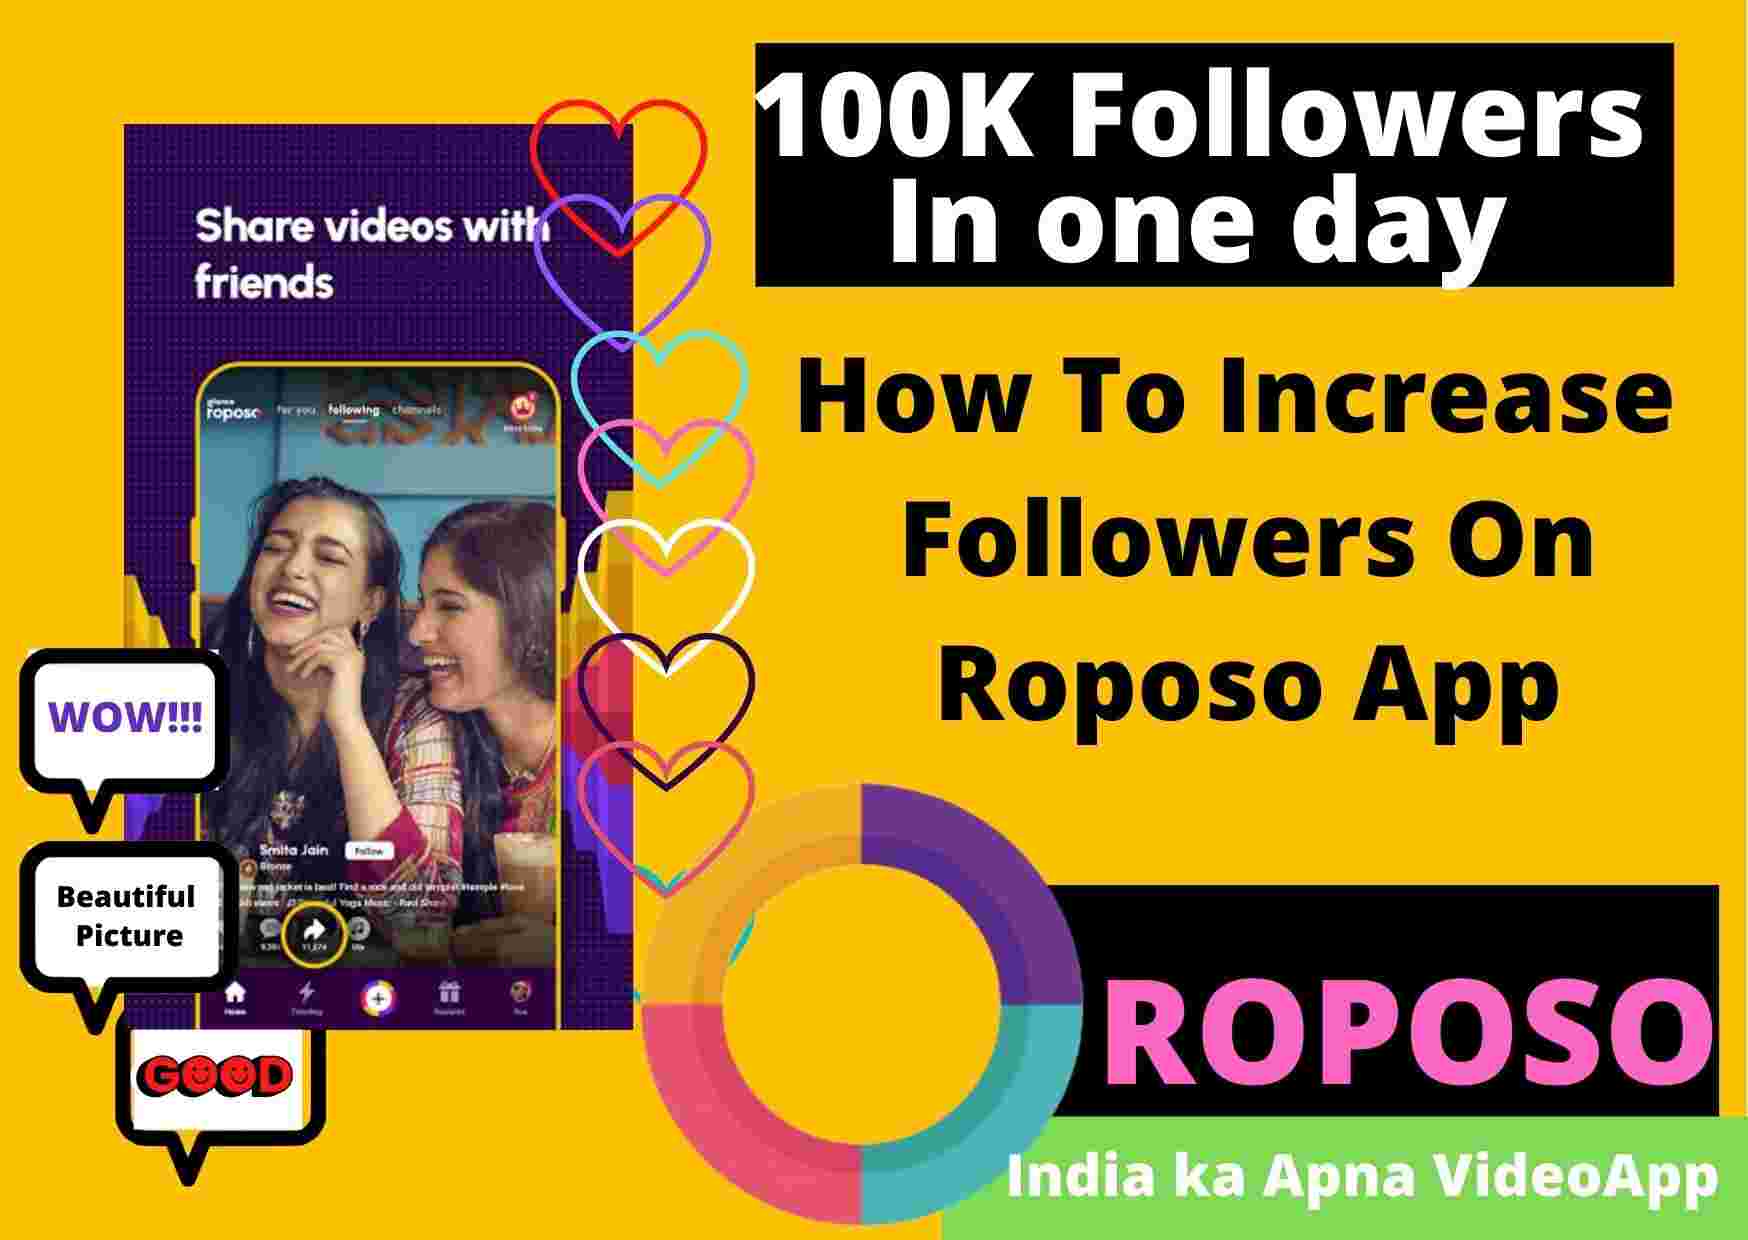 Roposo App followers in short time